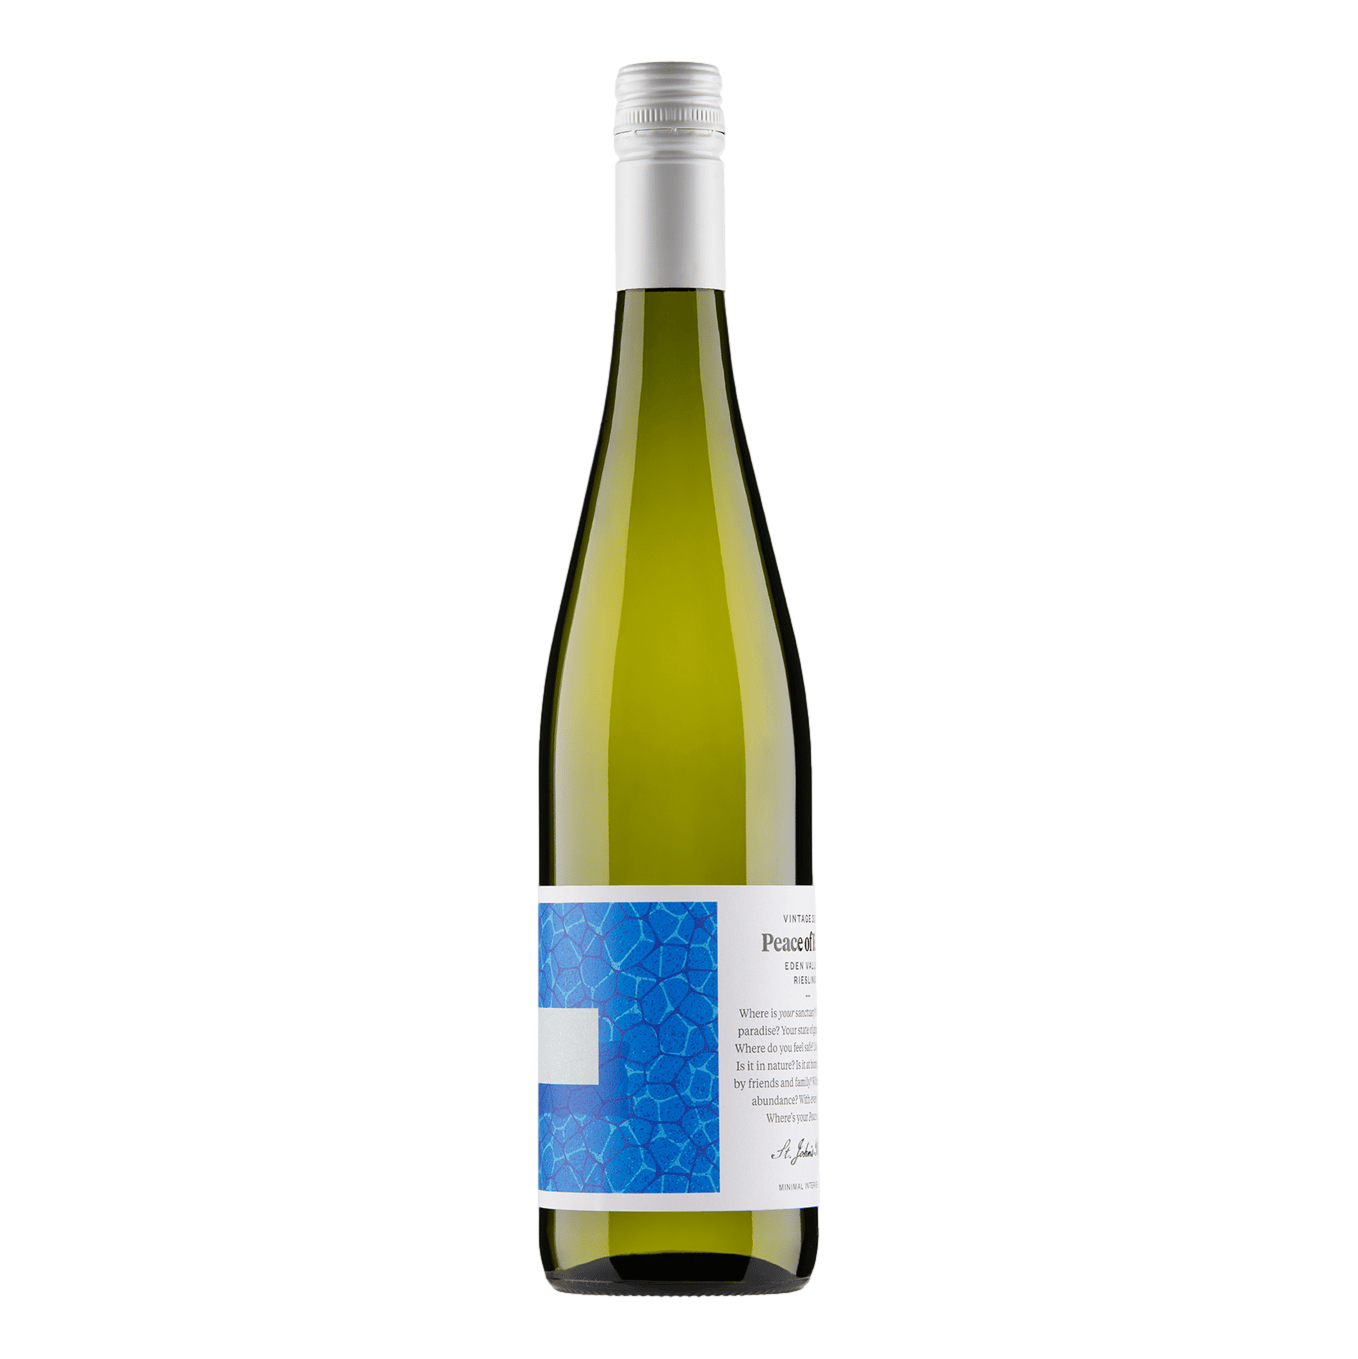 St John's Road Peace Of Eden Riesling